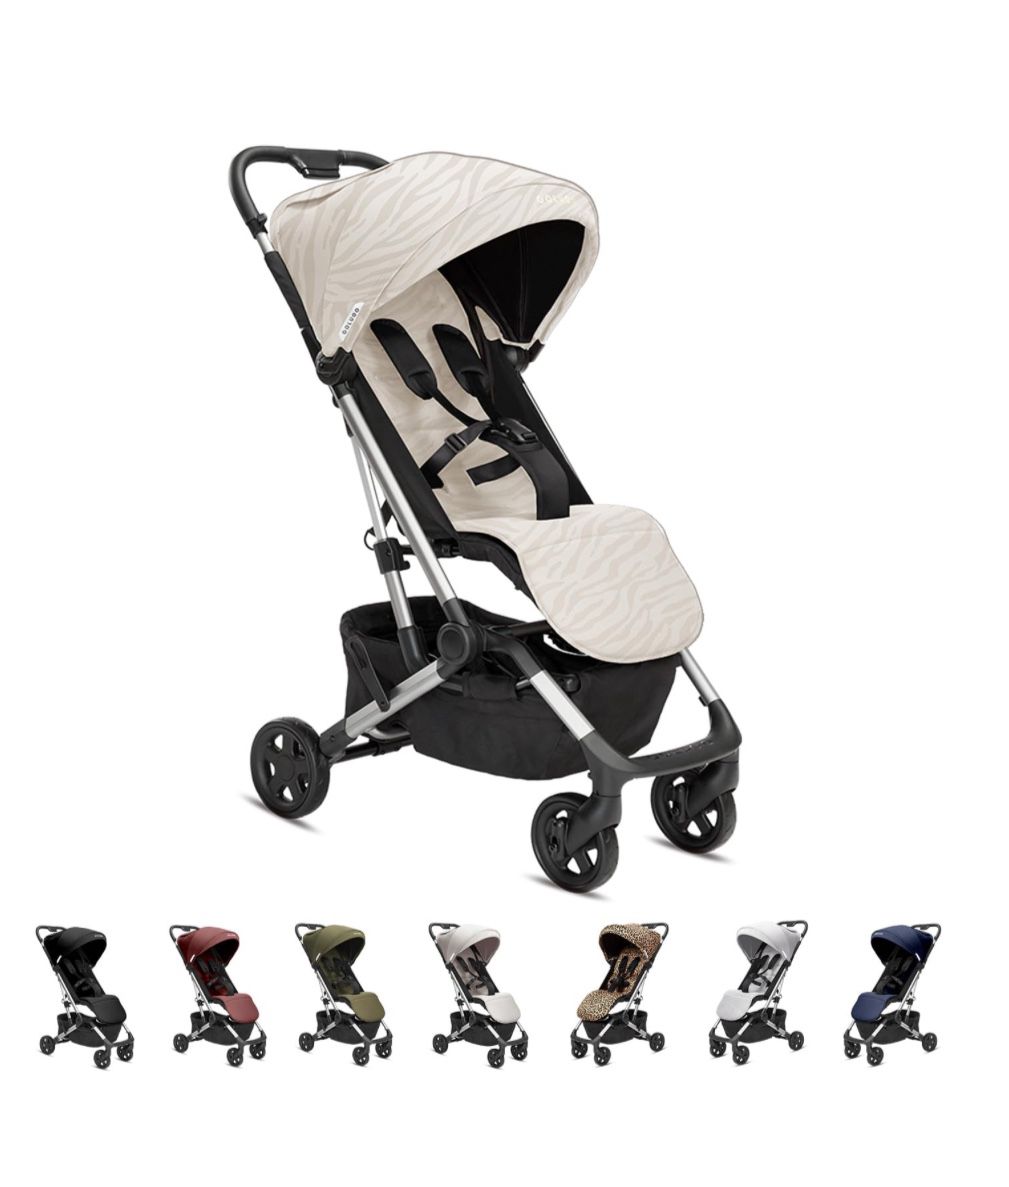 Compact Stroller - One Hand Fold Lightweight Stroller, Travel Stroller, Toddler Stroller, Airplane Stroller, Foldable Stroller with Rain Cover, Backpa